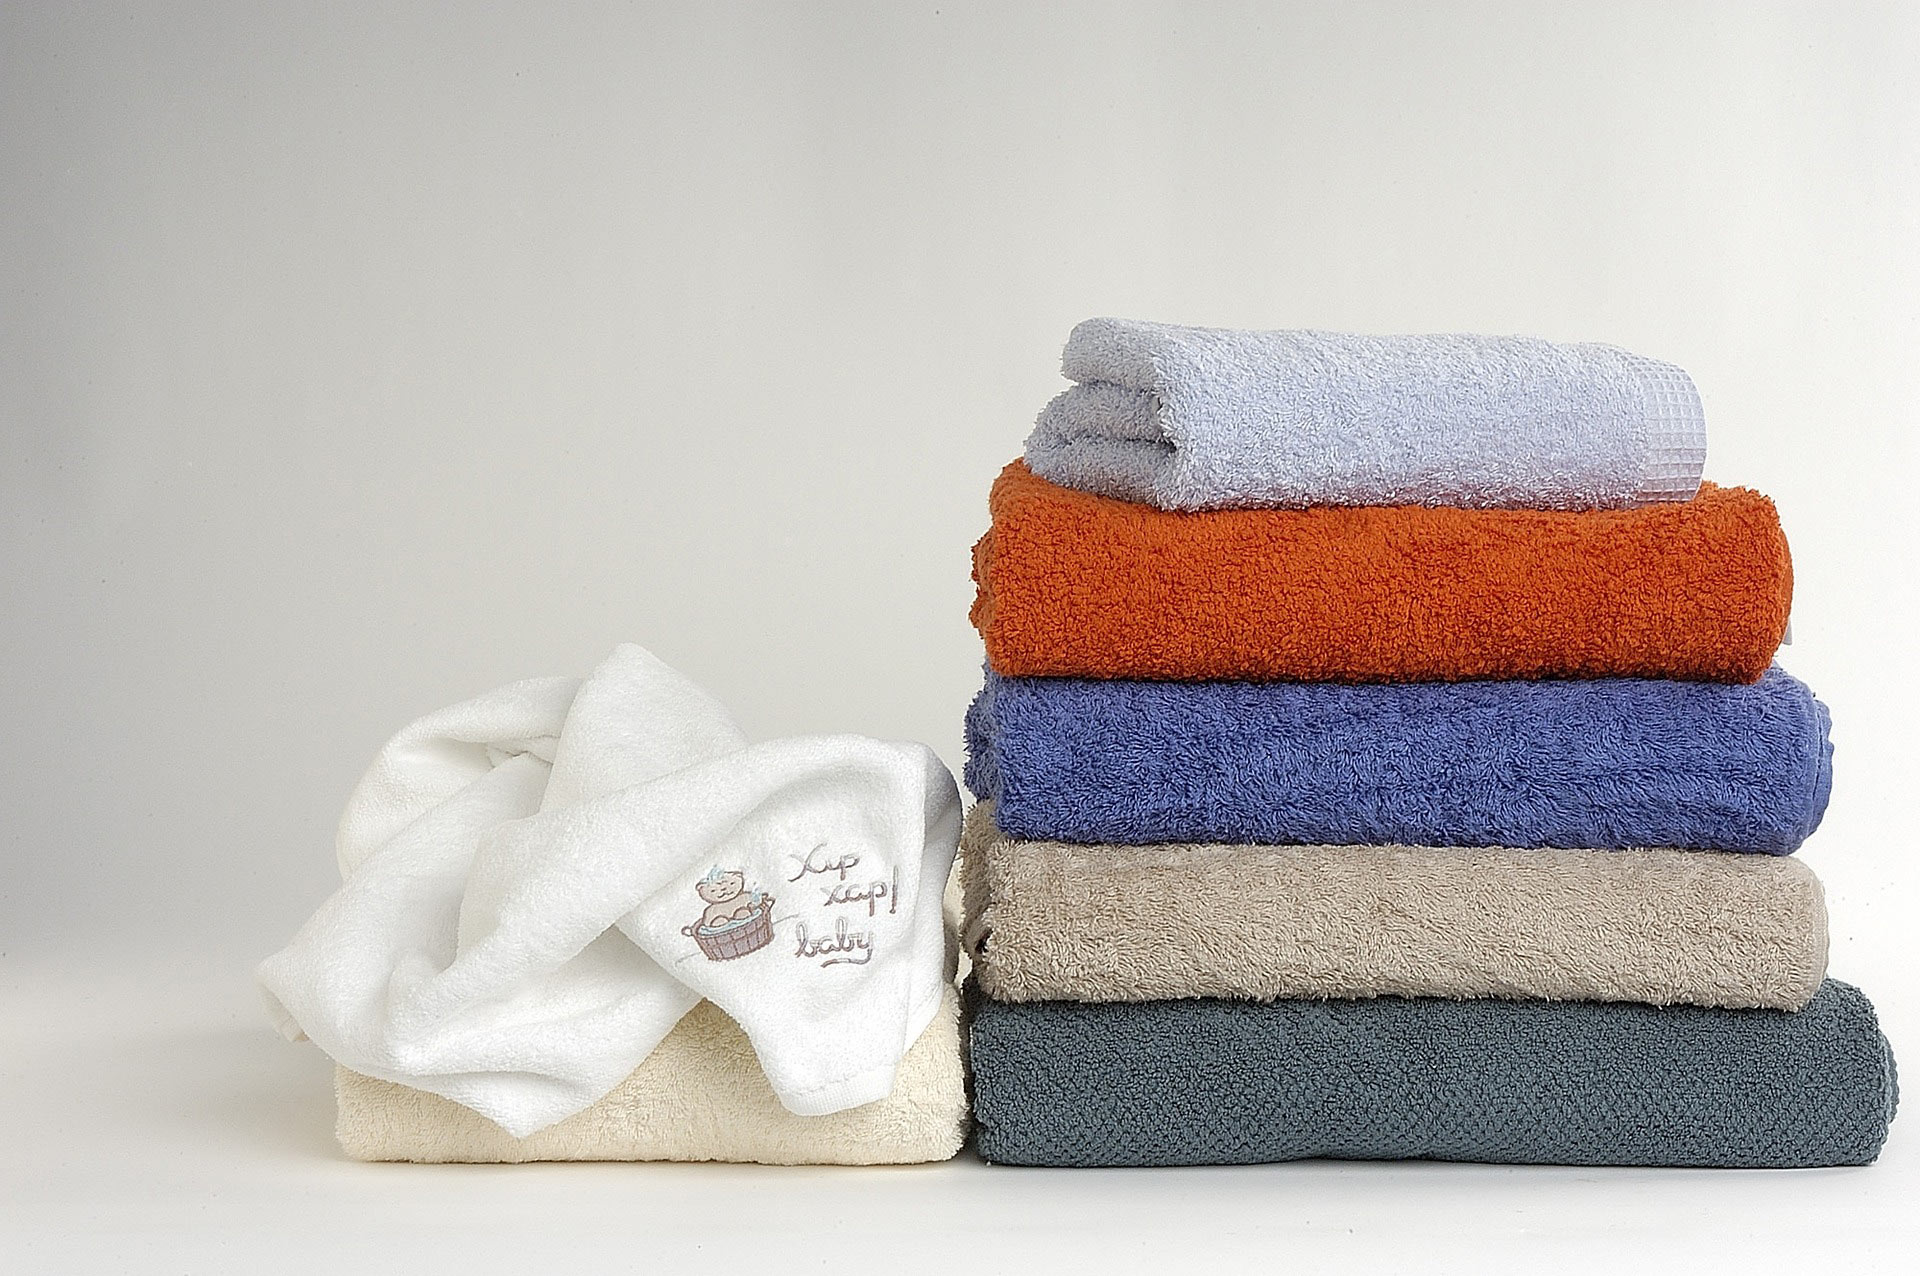 Folded Family Towels, Source: Pixabay